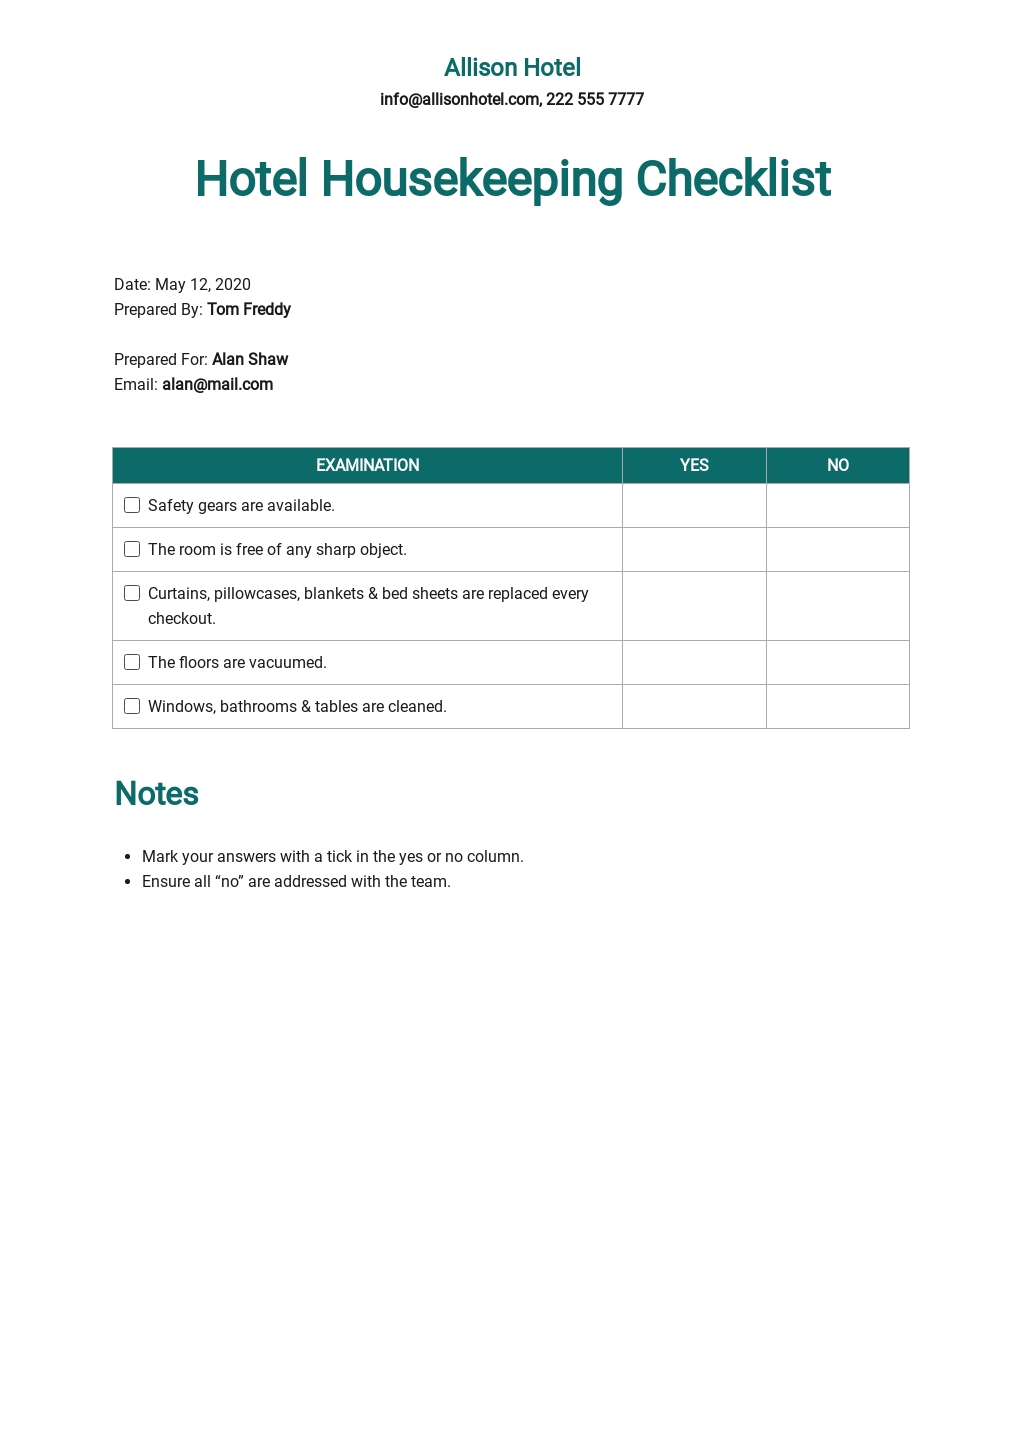 Hotel Housekeeping Checklist Template - Google Docs, Word, Apple Pages, PDF